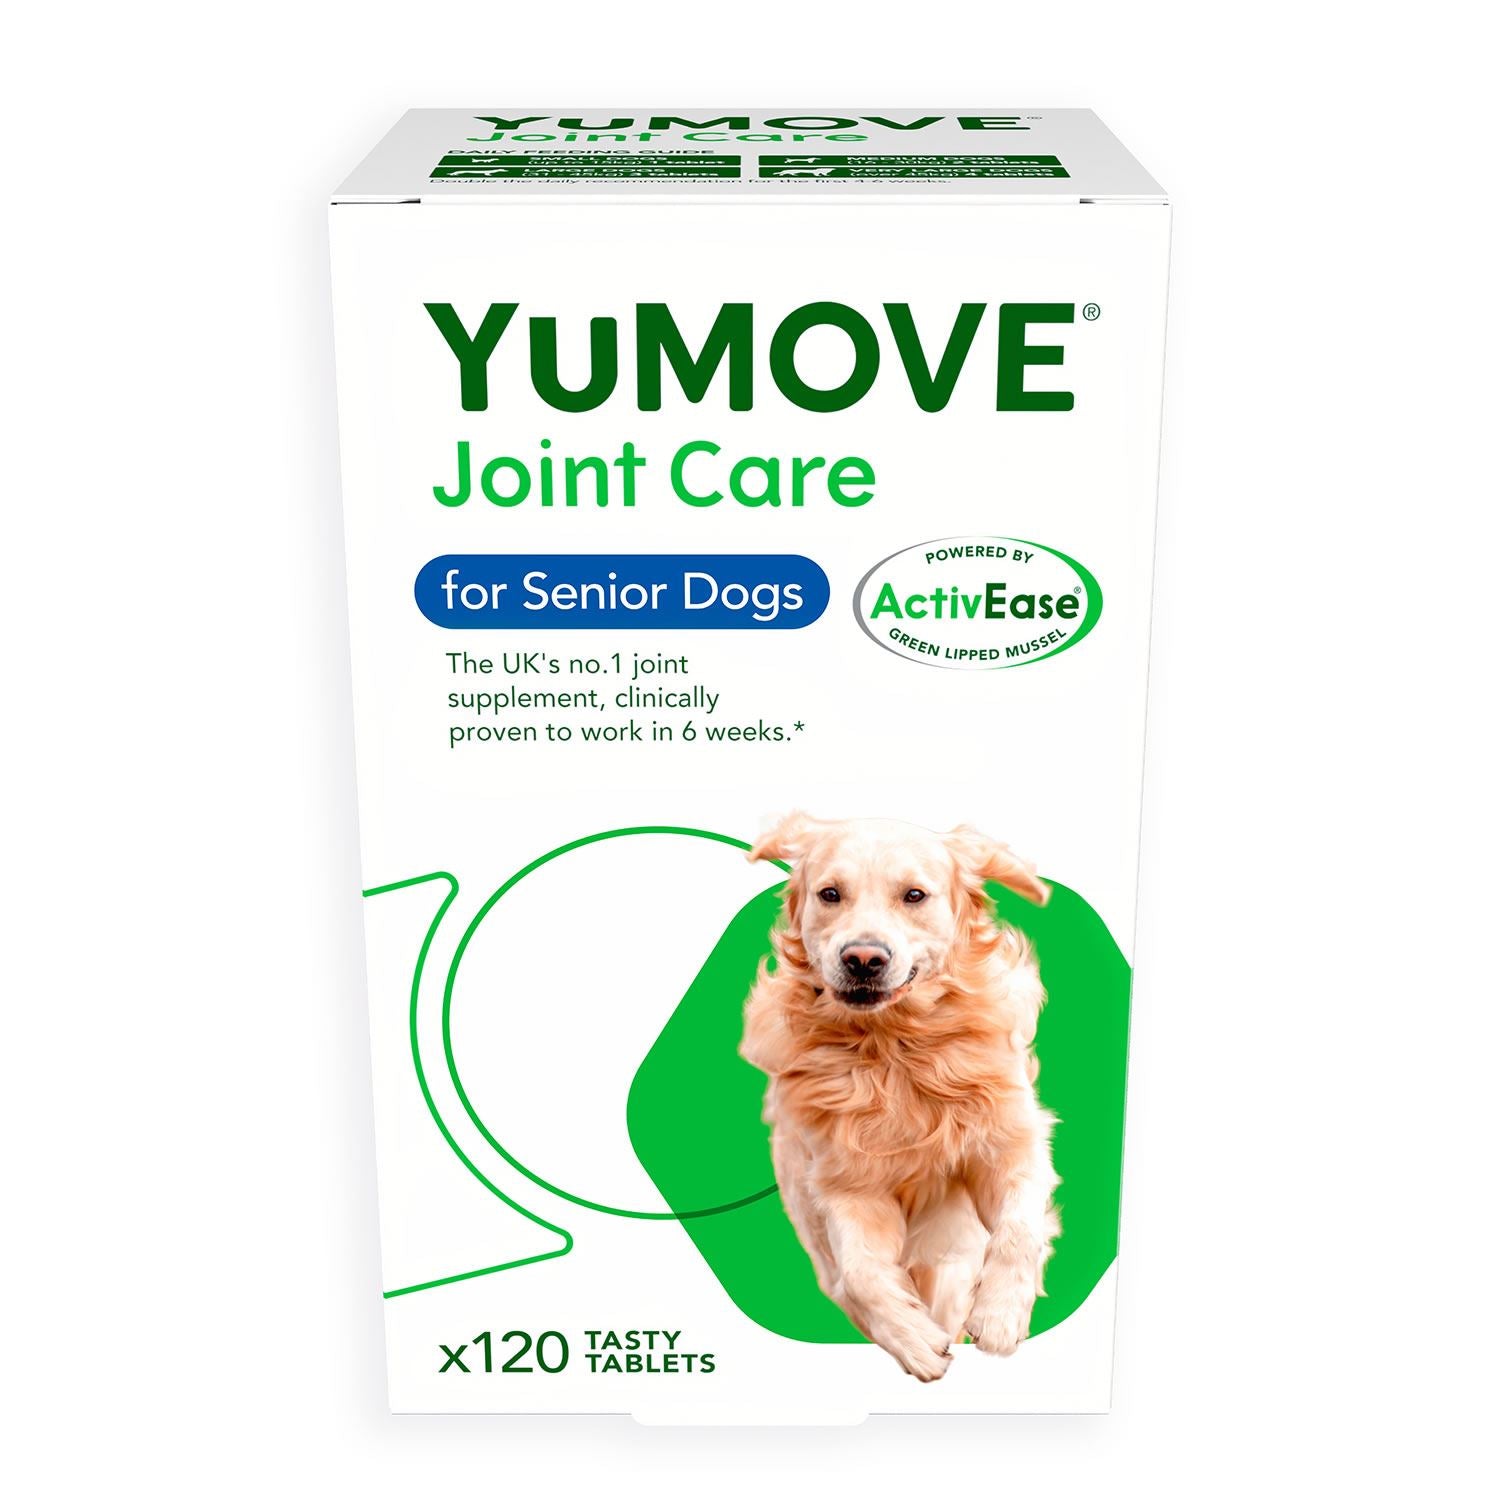 Yumove Joint Care For Senior Dogs - Just Horse Riders